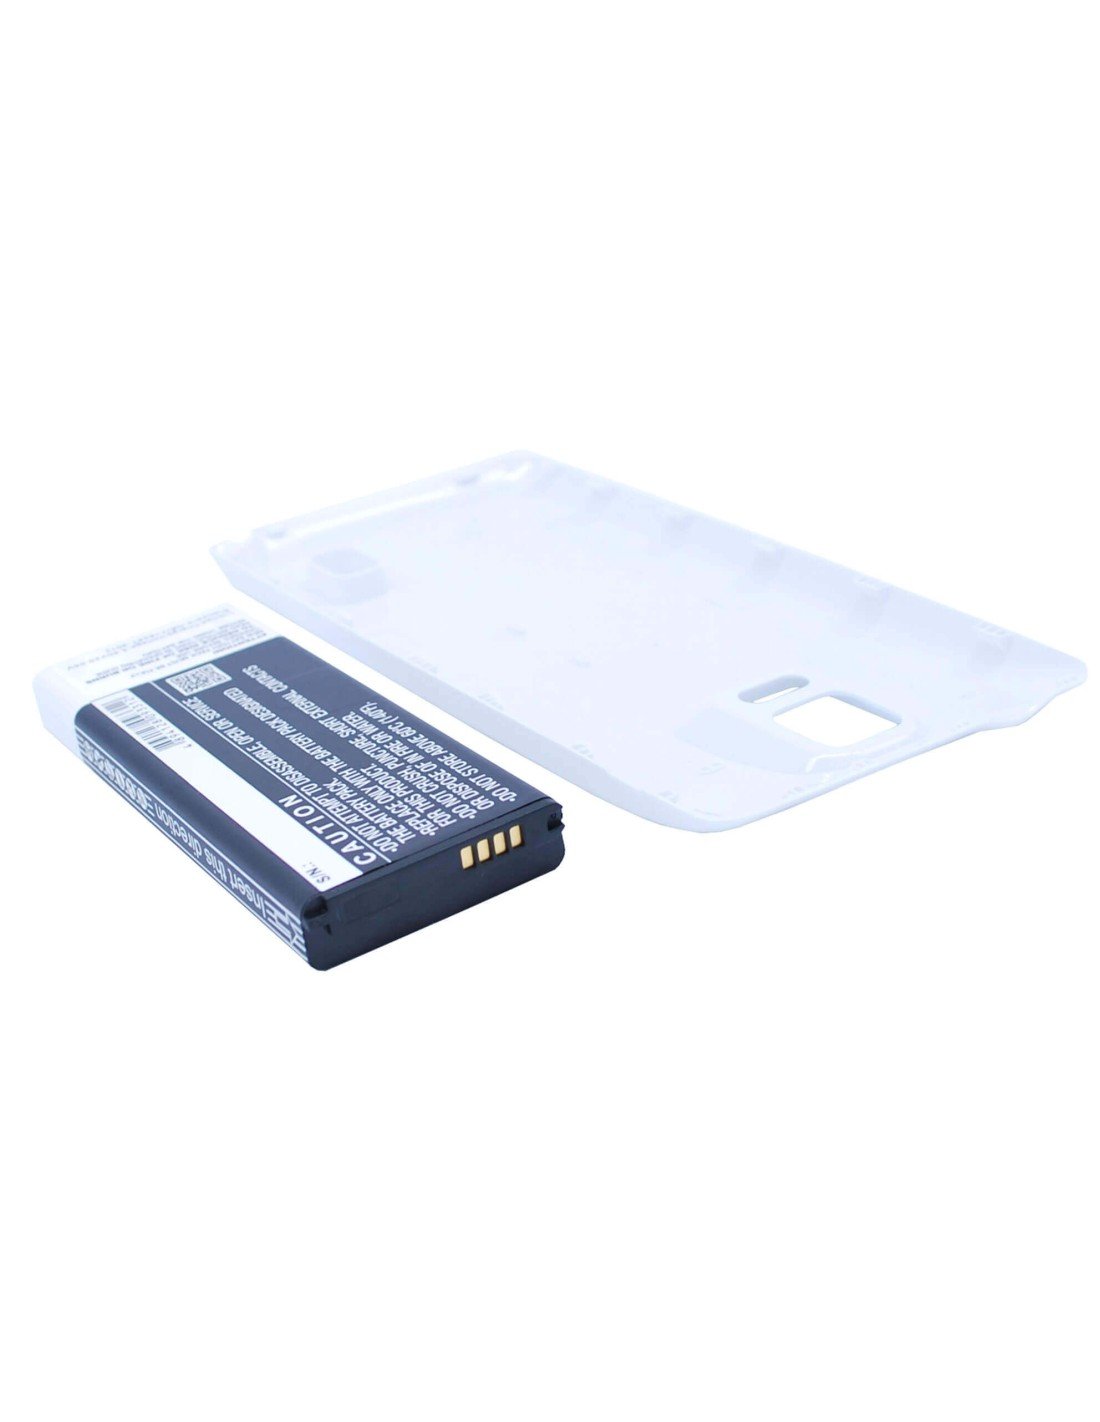 Battery for Samsung Galaxy Note 4, SM-N910F, SM-N9109W with white back cover 3.85V, 5600mAh - 21.56Wh